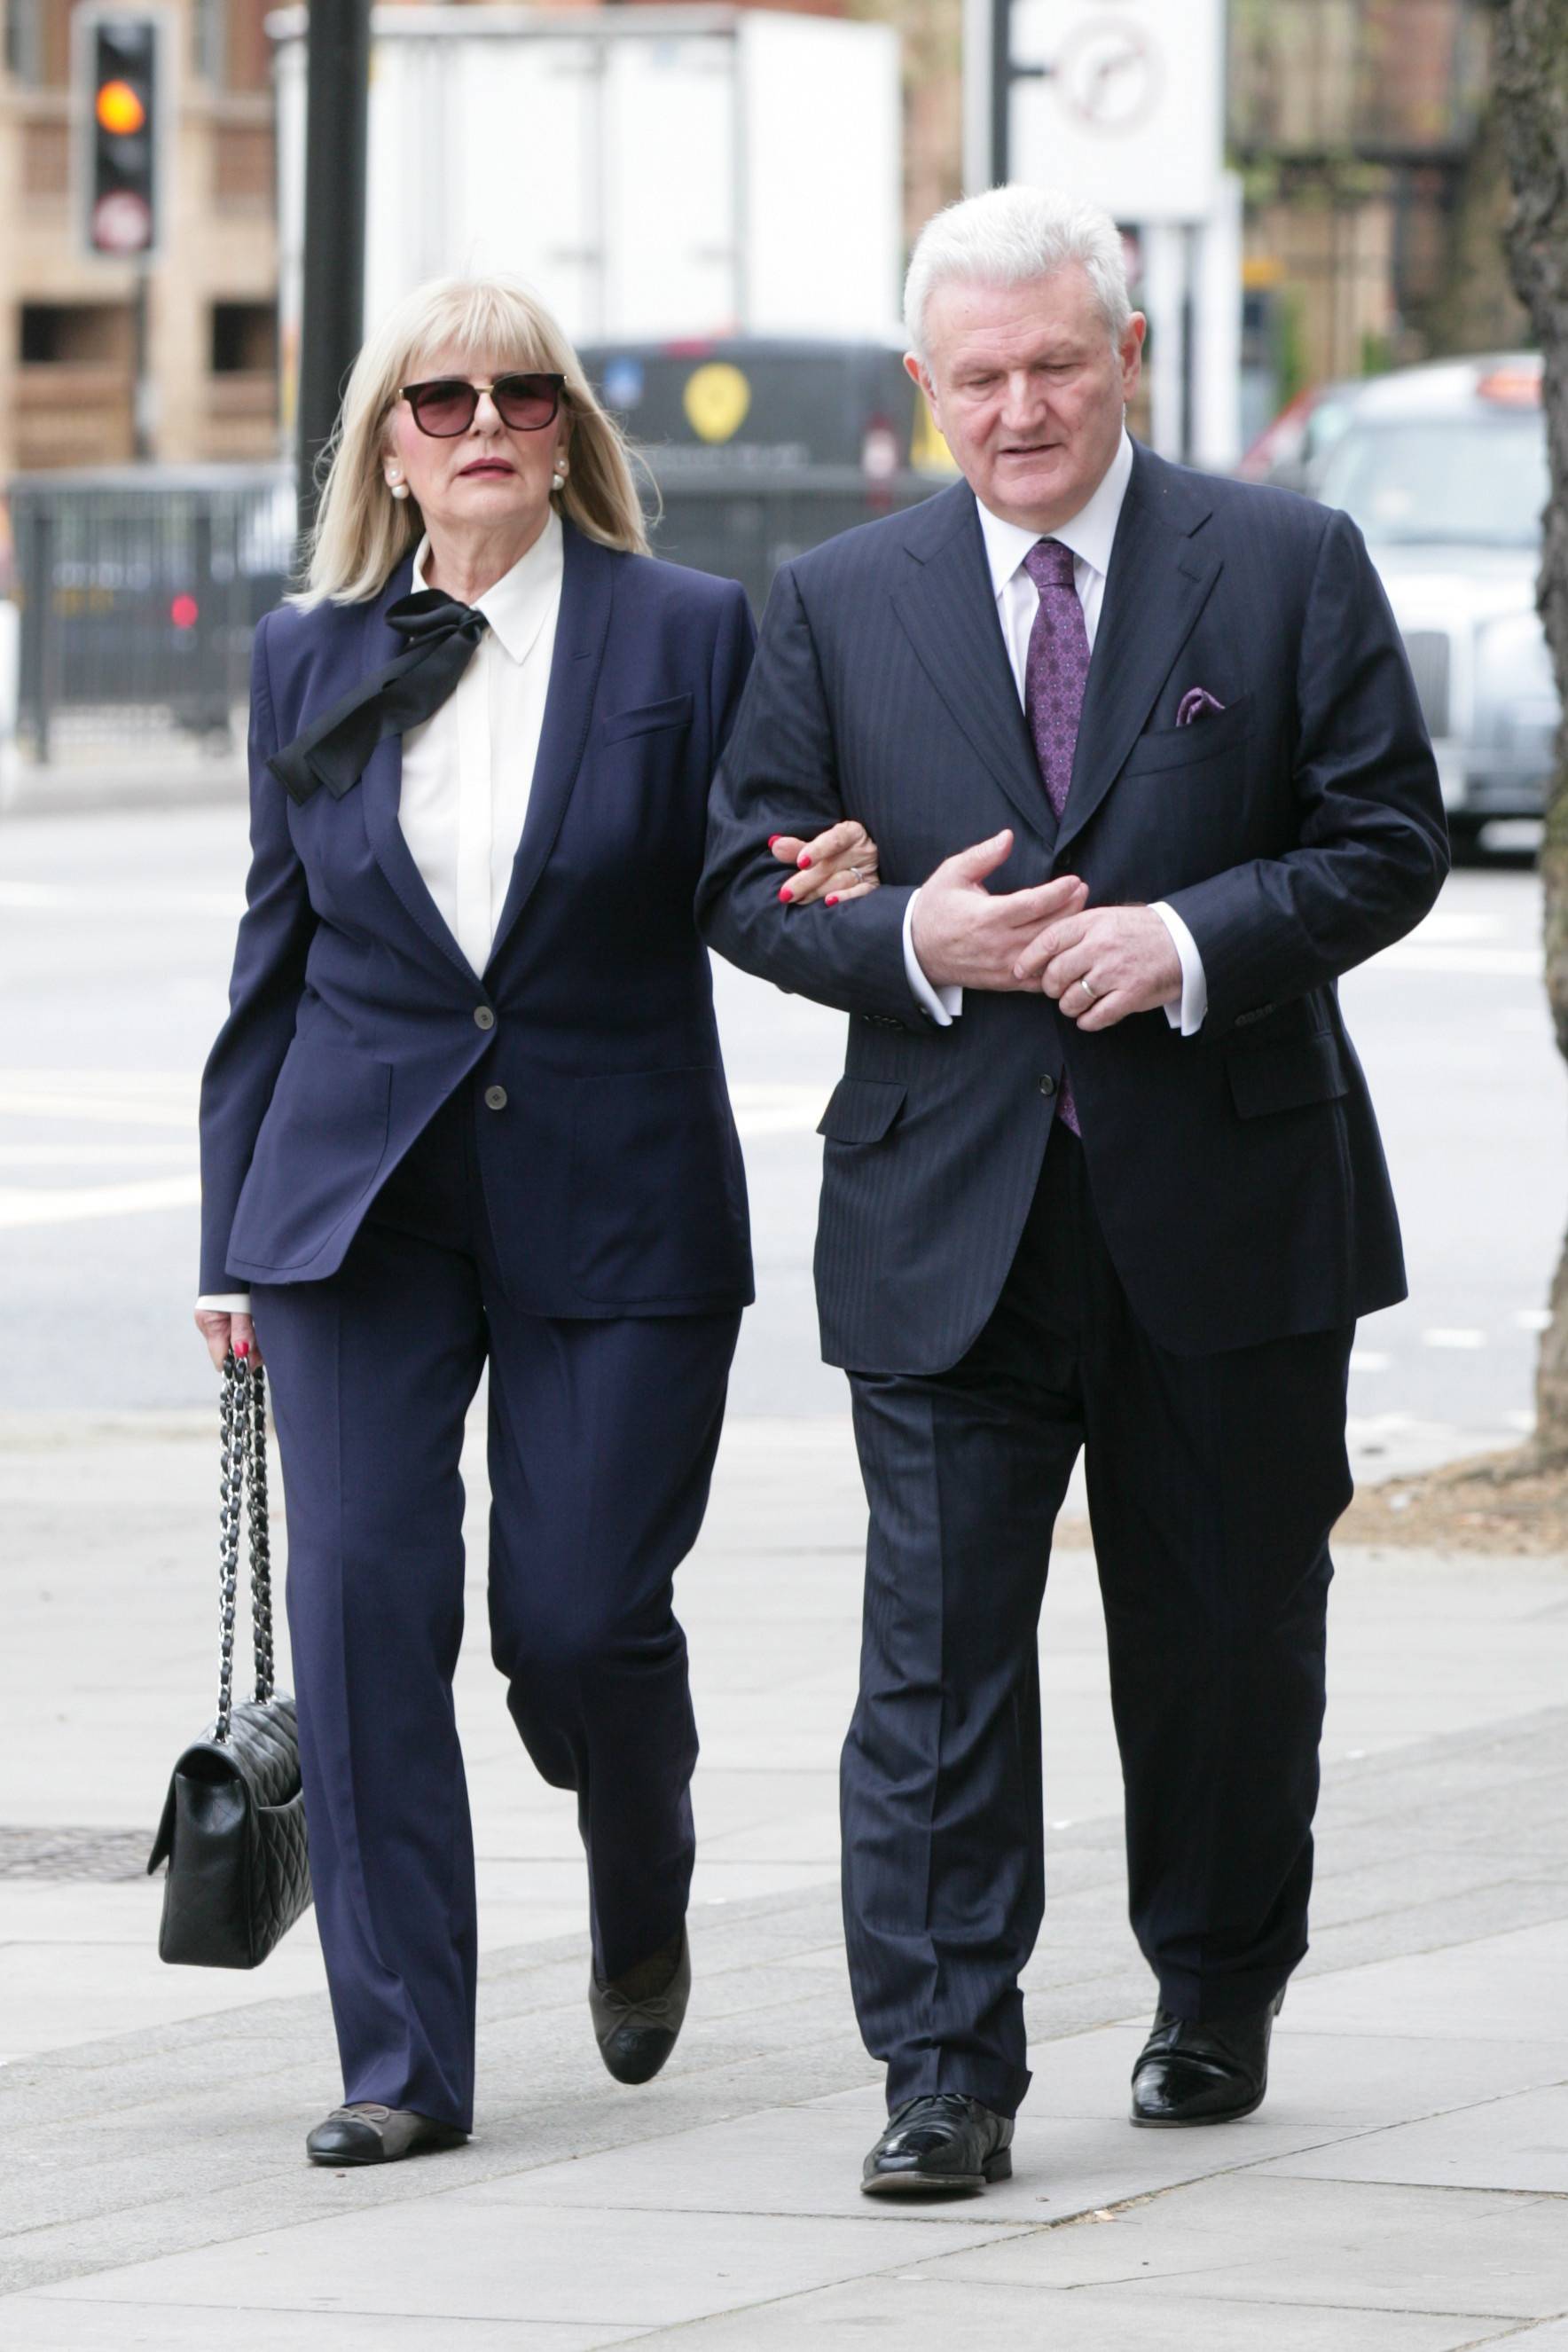 EXCLUSIVE Ivica Todoric and his wife Vesna Todoric are seen arriving at Westminster Magistrates Court in London today. A judge ruled today that the Agrokor founder is to be extradited back to Croatia.